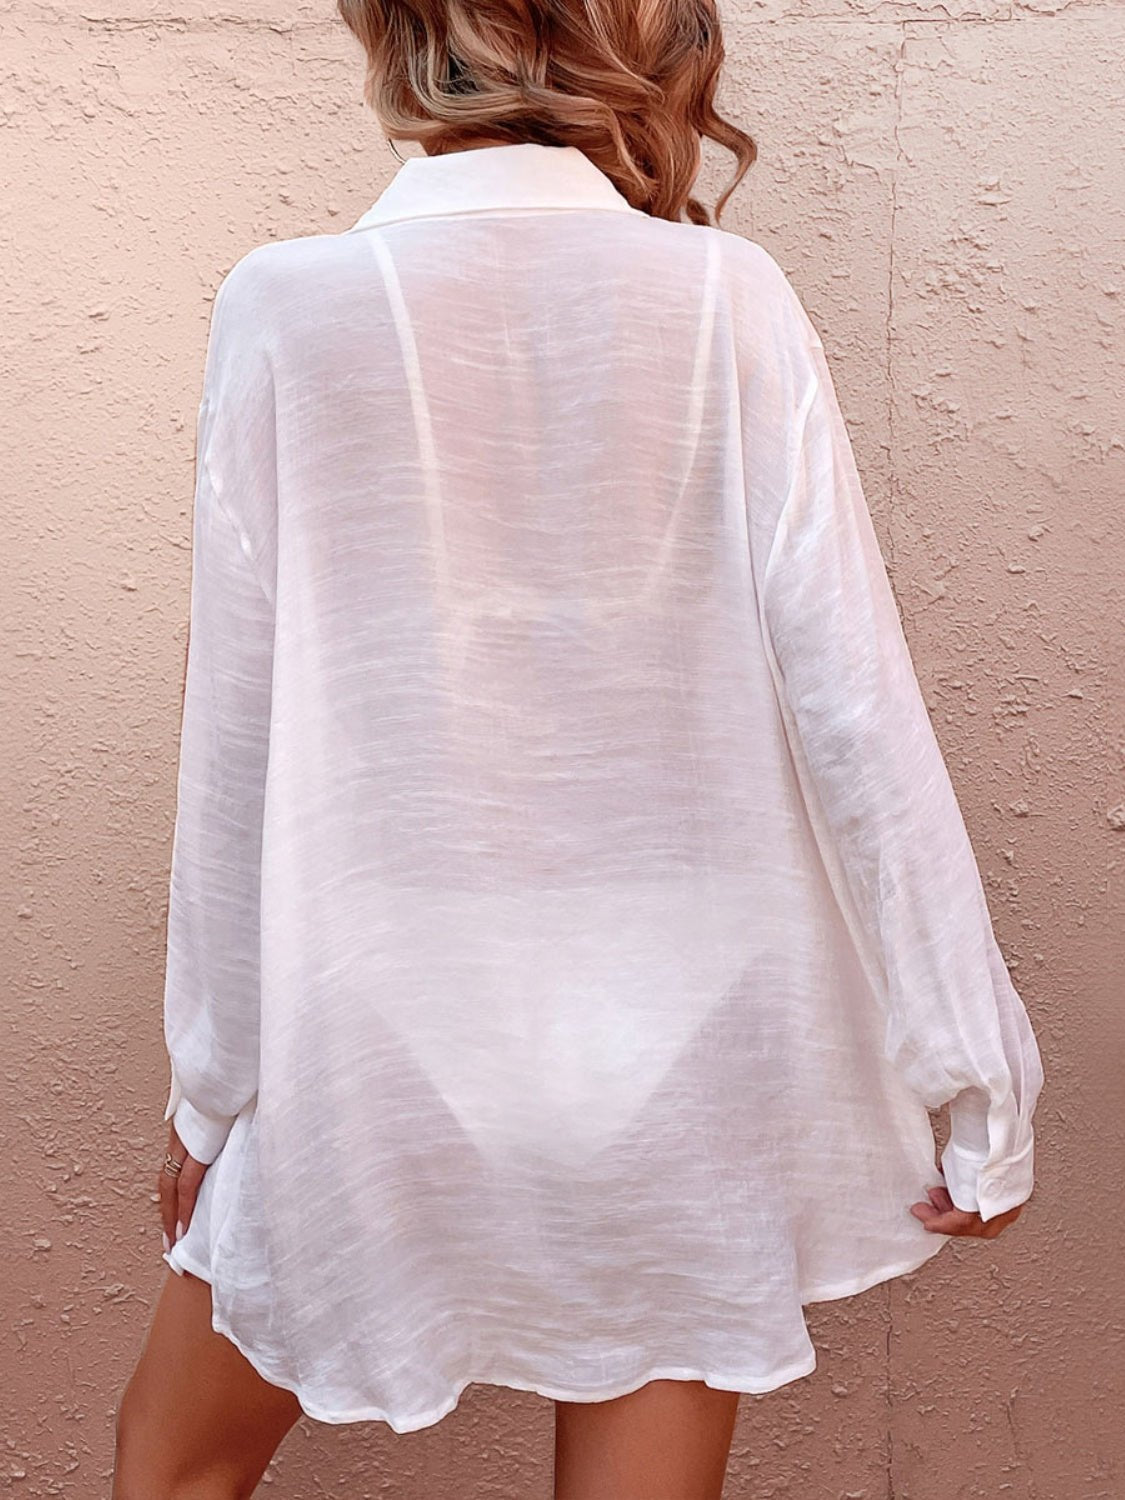 Pocketed Dropped Shoulder Cover Up - Fashion Girl Online Store